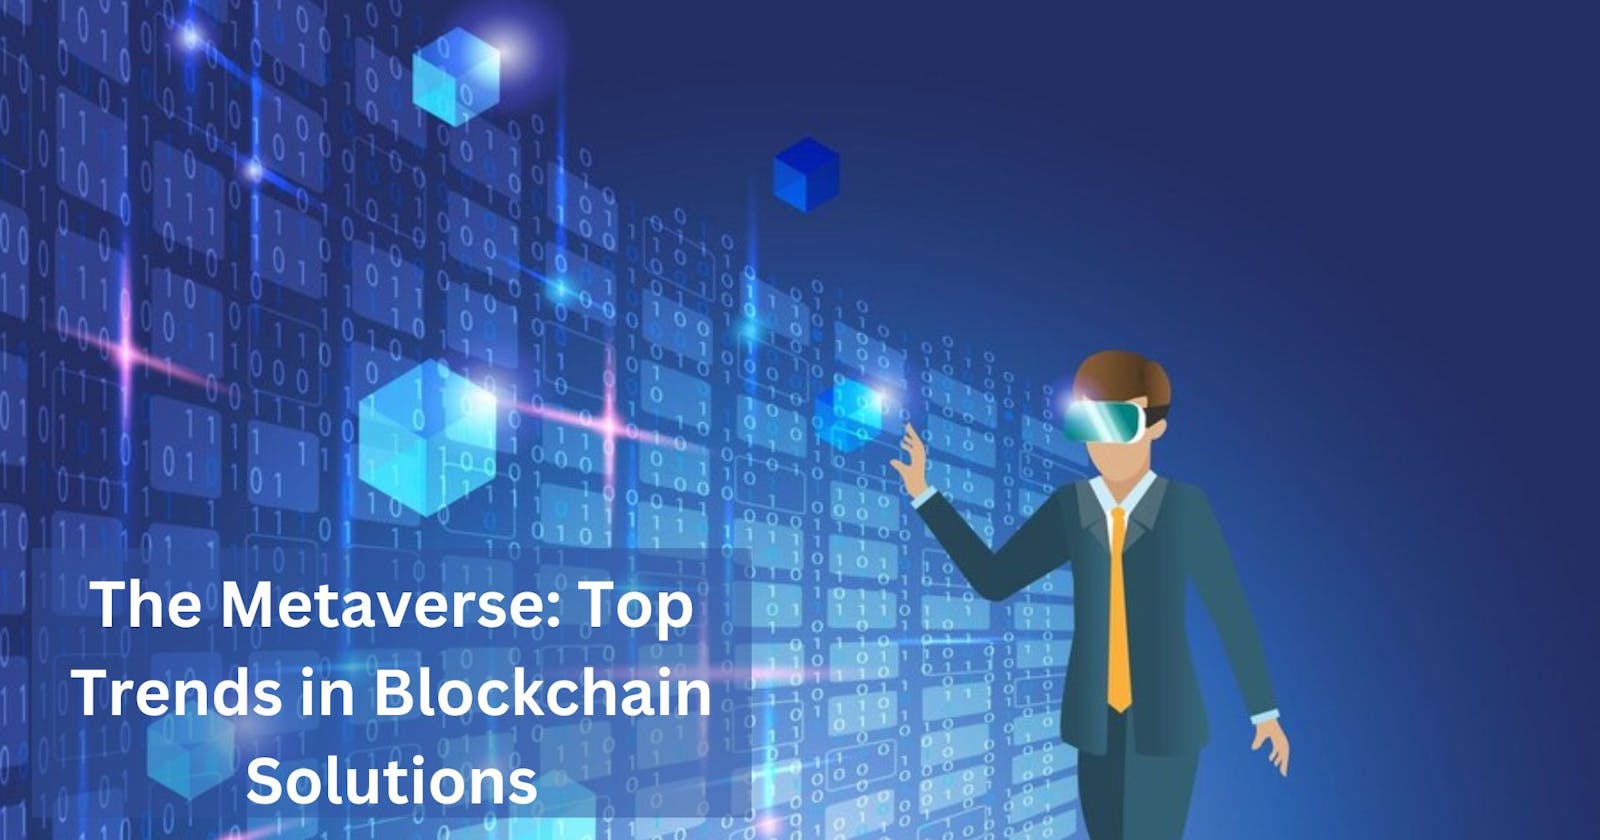 The Metaverse: Top Trends in Blockchain Solutions